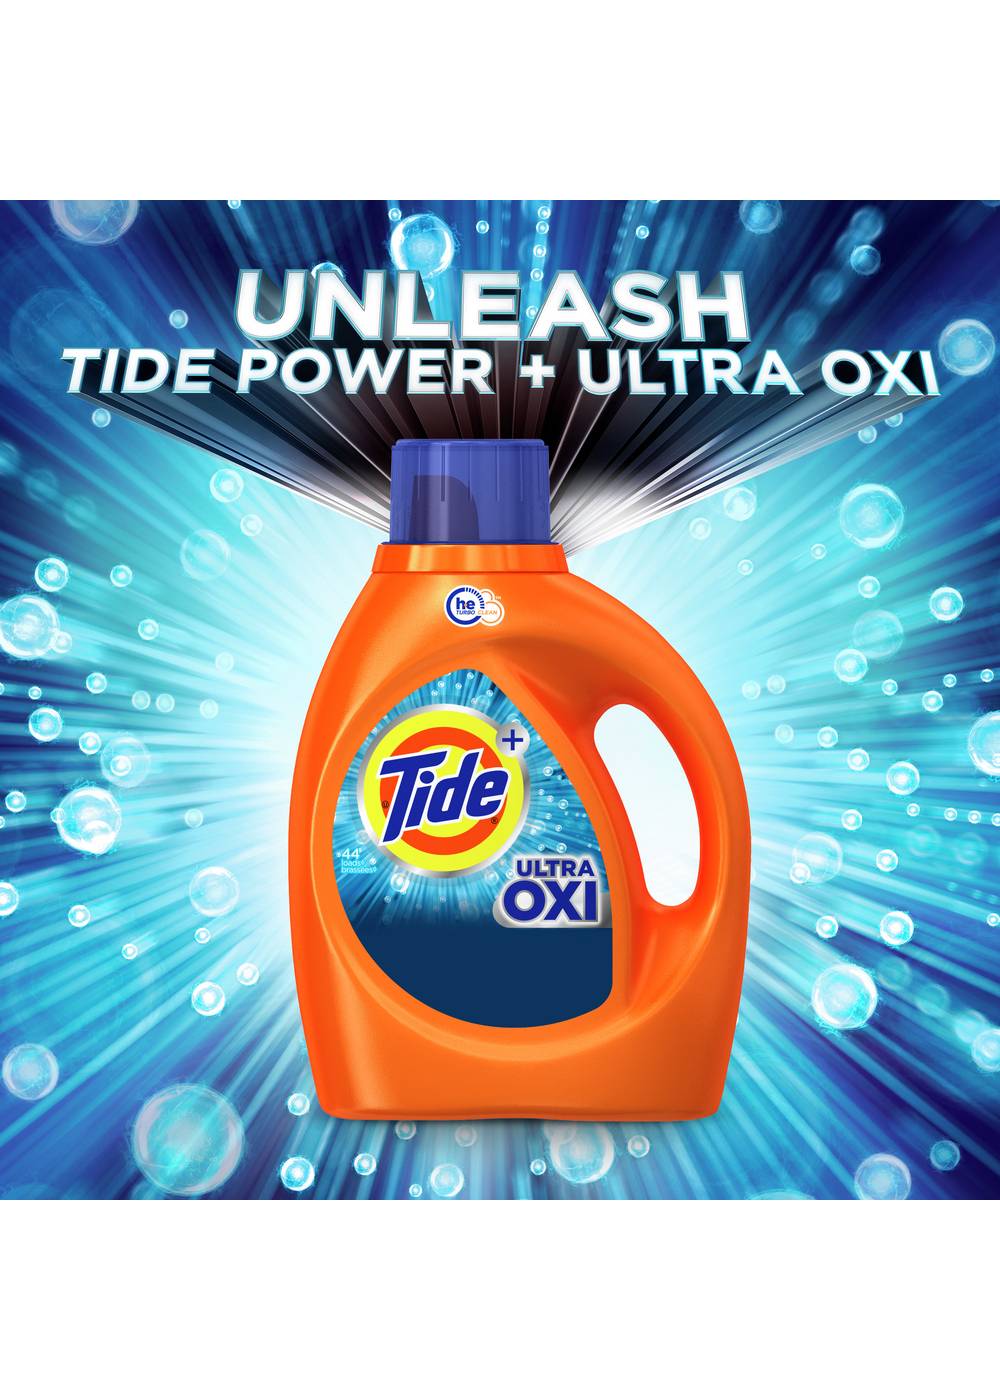 Tide + Ultra OXI HE Turbo Clean Liquid Laundry Detergent, 59 Loads; image 6 of 9